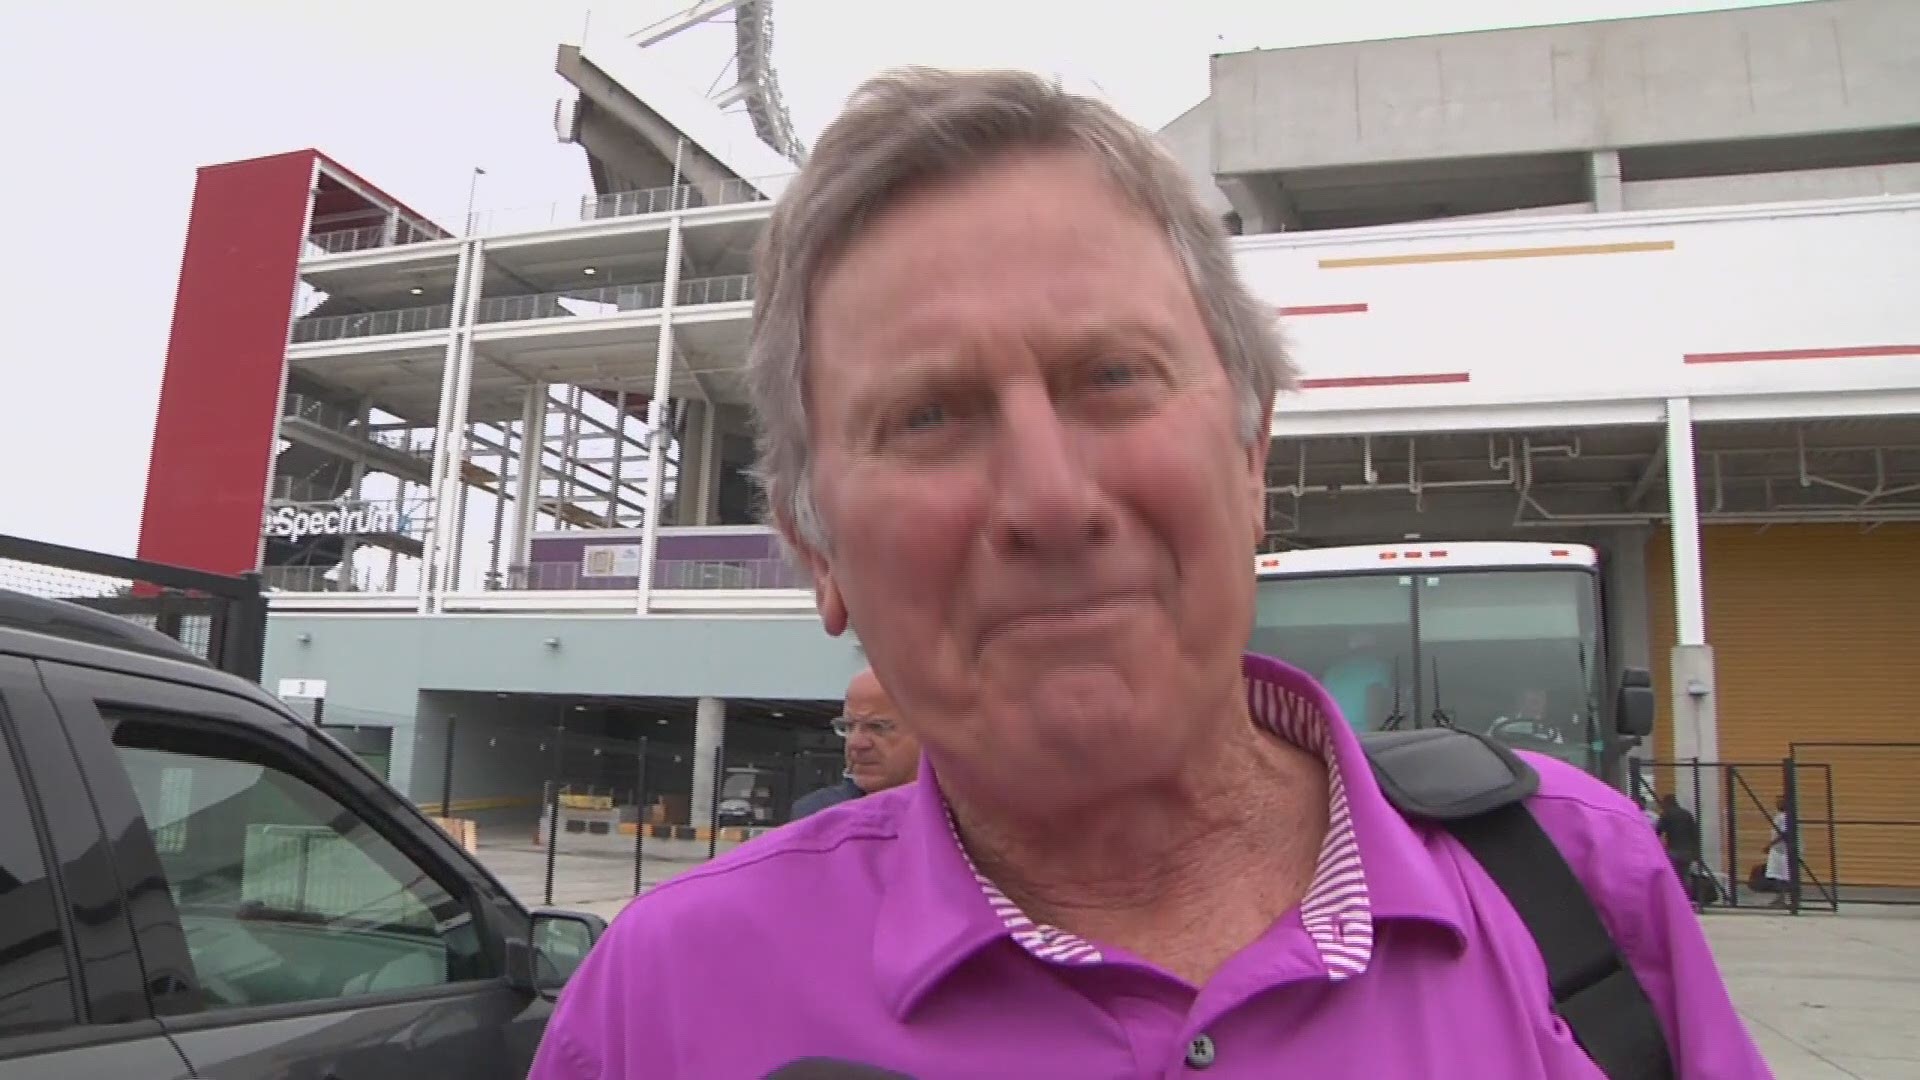 Steve Spurrier talks with reporters in Orlando following the reports that the Alliance of American Football will suspend operations.